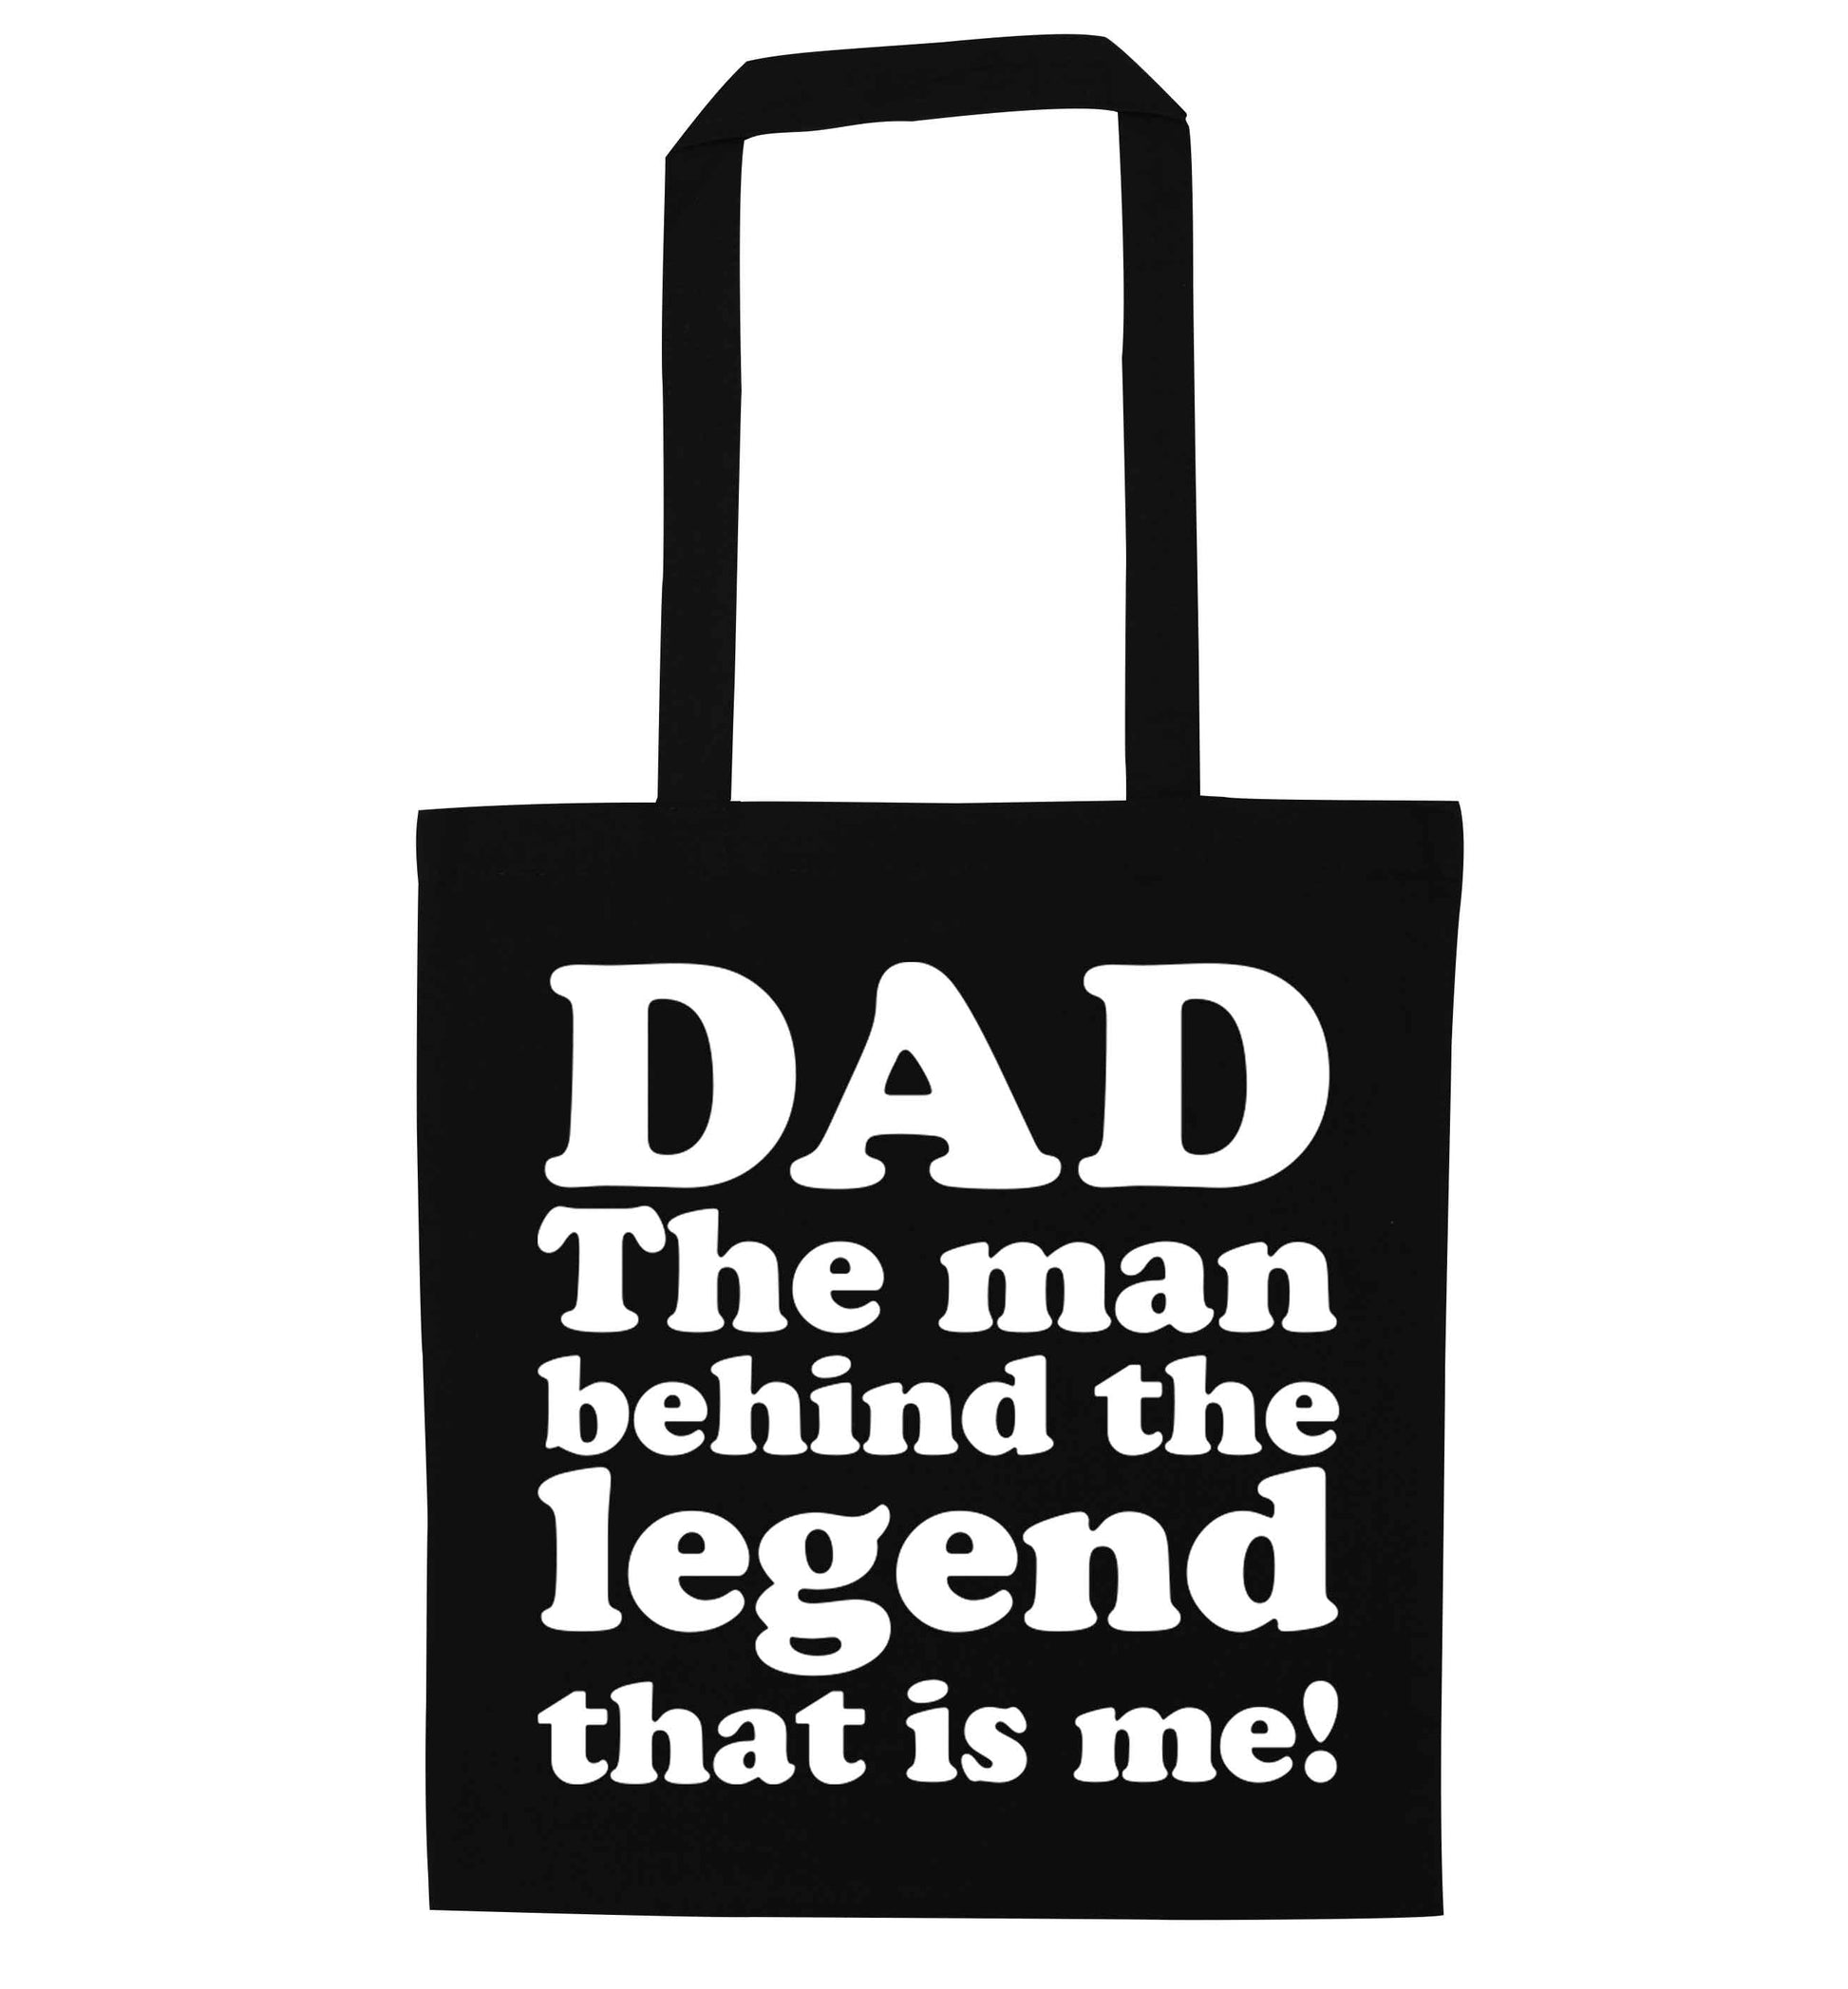 Dad the man behind the legend that is me black tote bag